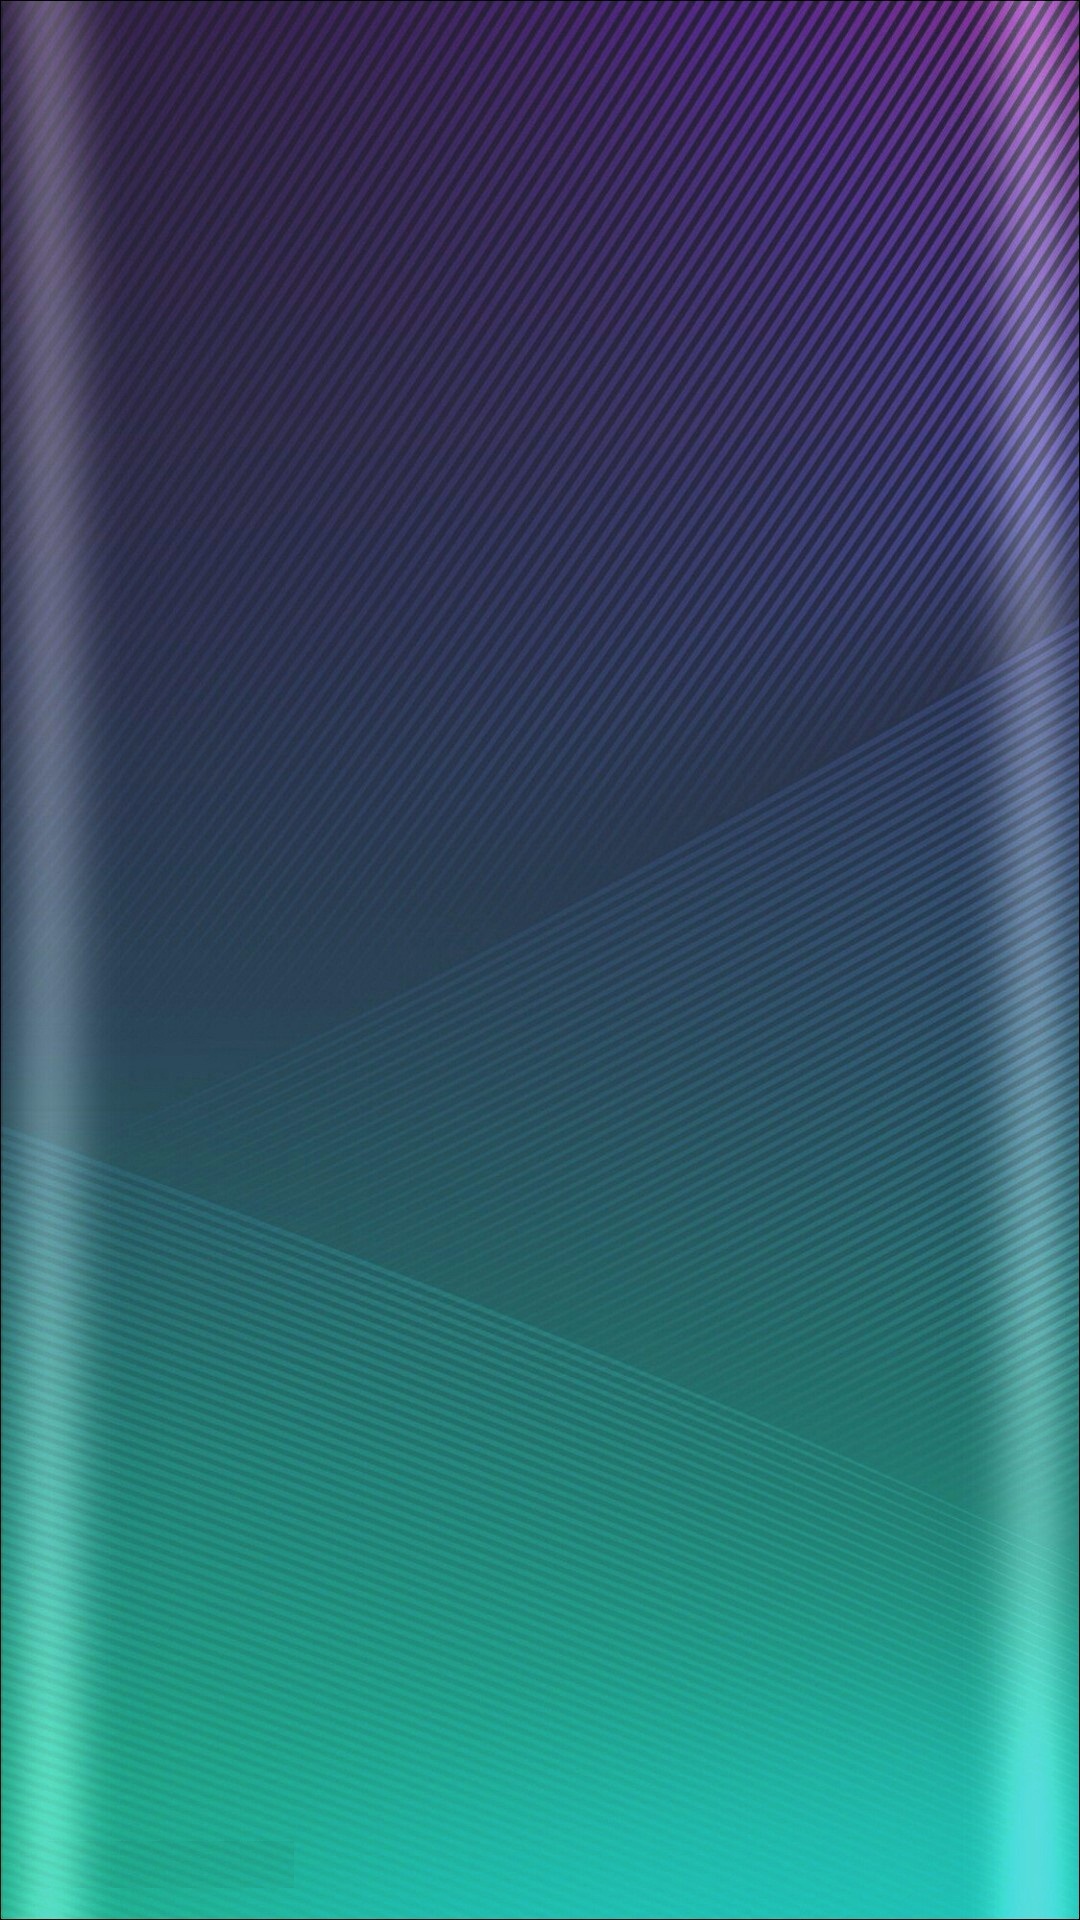 Teal Color Wallpaper Android with image resolution 1080x1920 pixel. You can make this wallpaper for your Android backgrounds, Tablet, Smartphones Screensavers and Mobile Phone Lock Screen